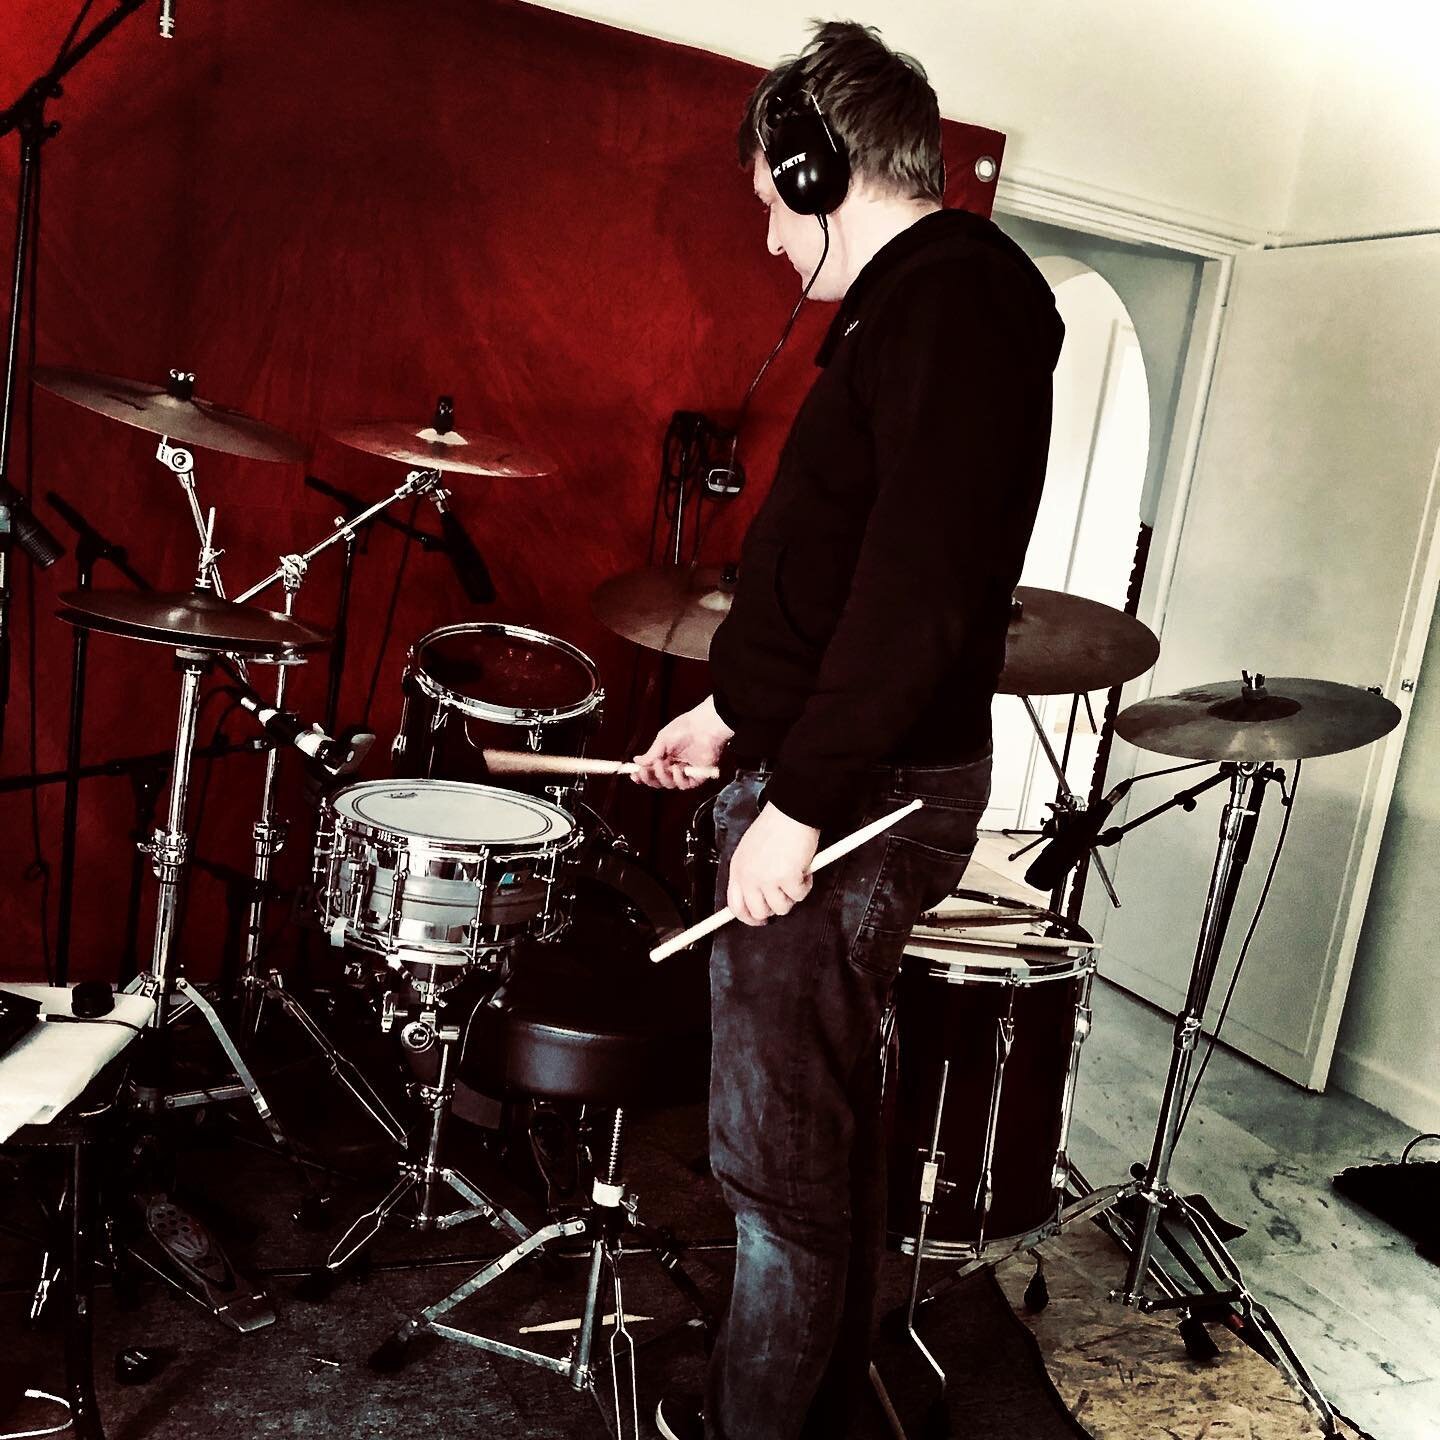 #flashback 
Drum recordings of our upcoming single Wake UP!
Taken just after Steve&rsquo;s kit was miked. .
.
.
.
.
.
.
#newsingle #nemeseaofficial #steve #thedrums #loud #drumrecordings #wakeup #groningen #groningencity